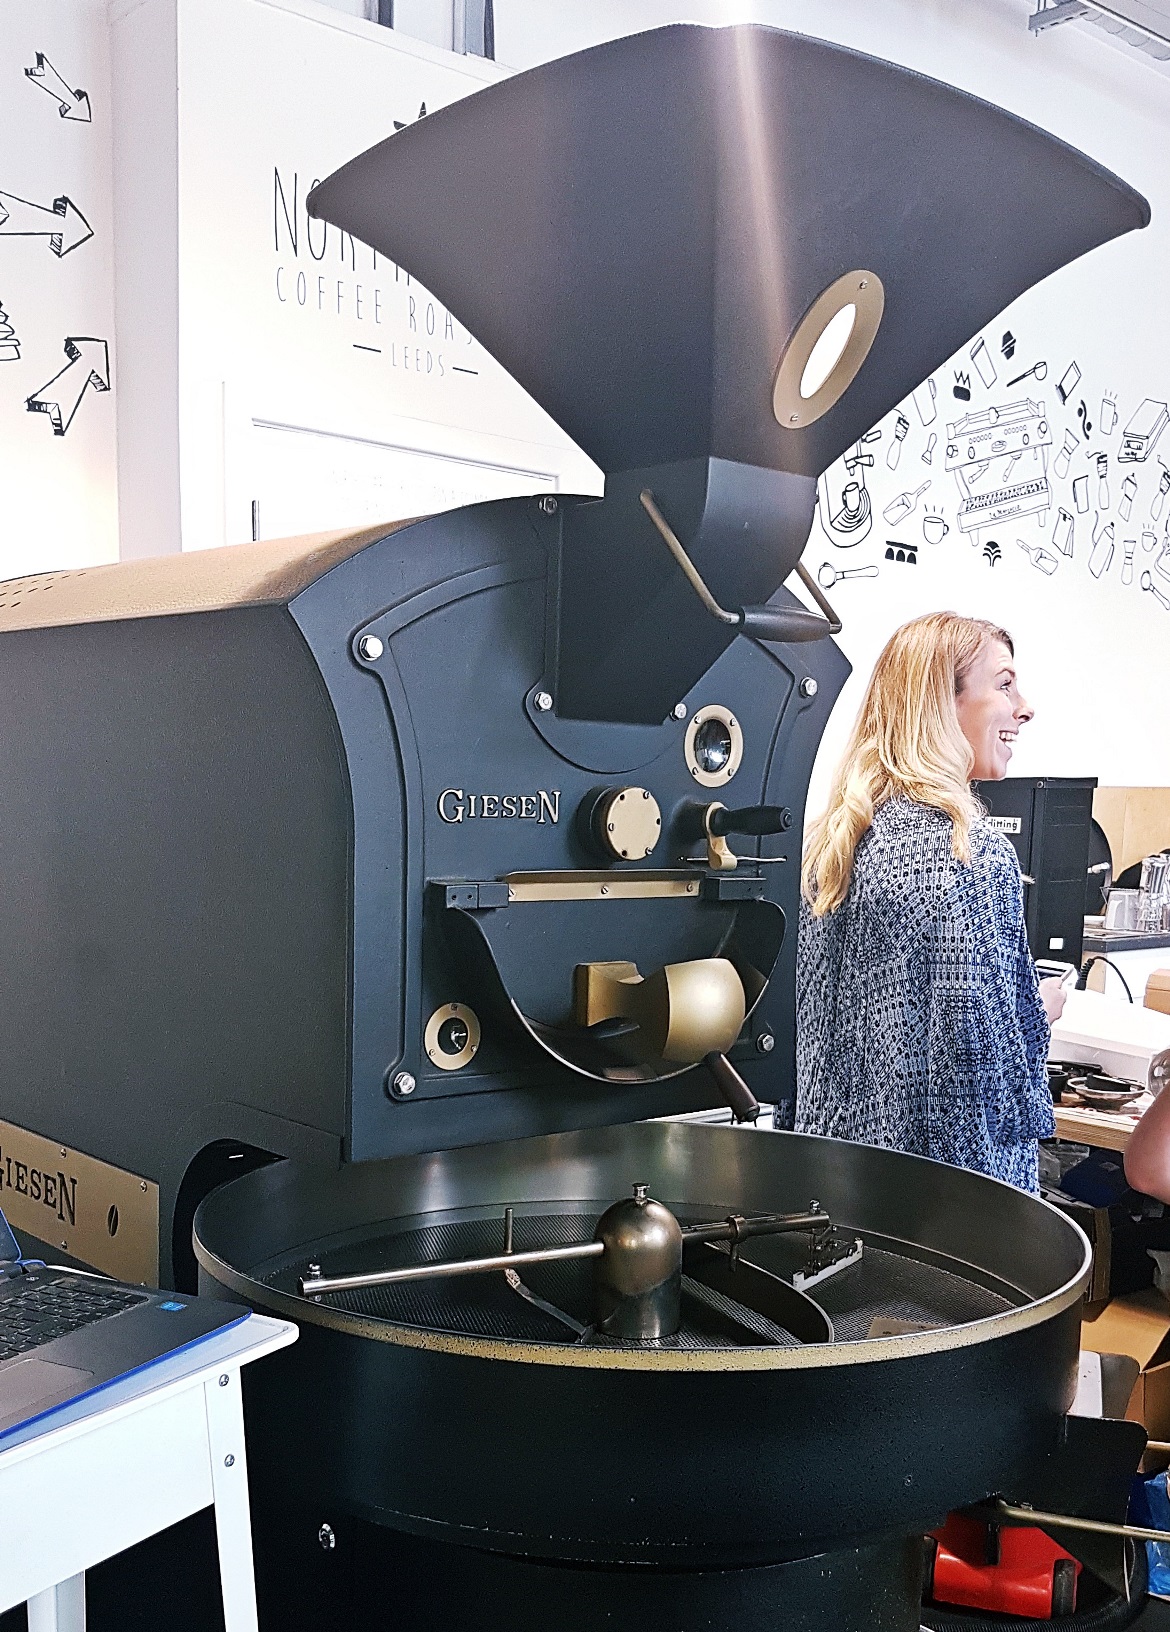 Coffee roasting equipment - Review of North Star Coffee Shop by BeckyBecky Blogs